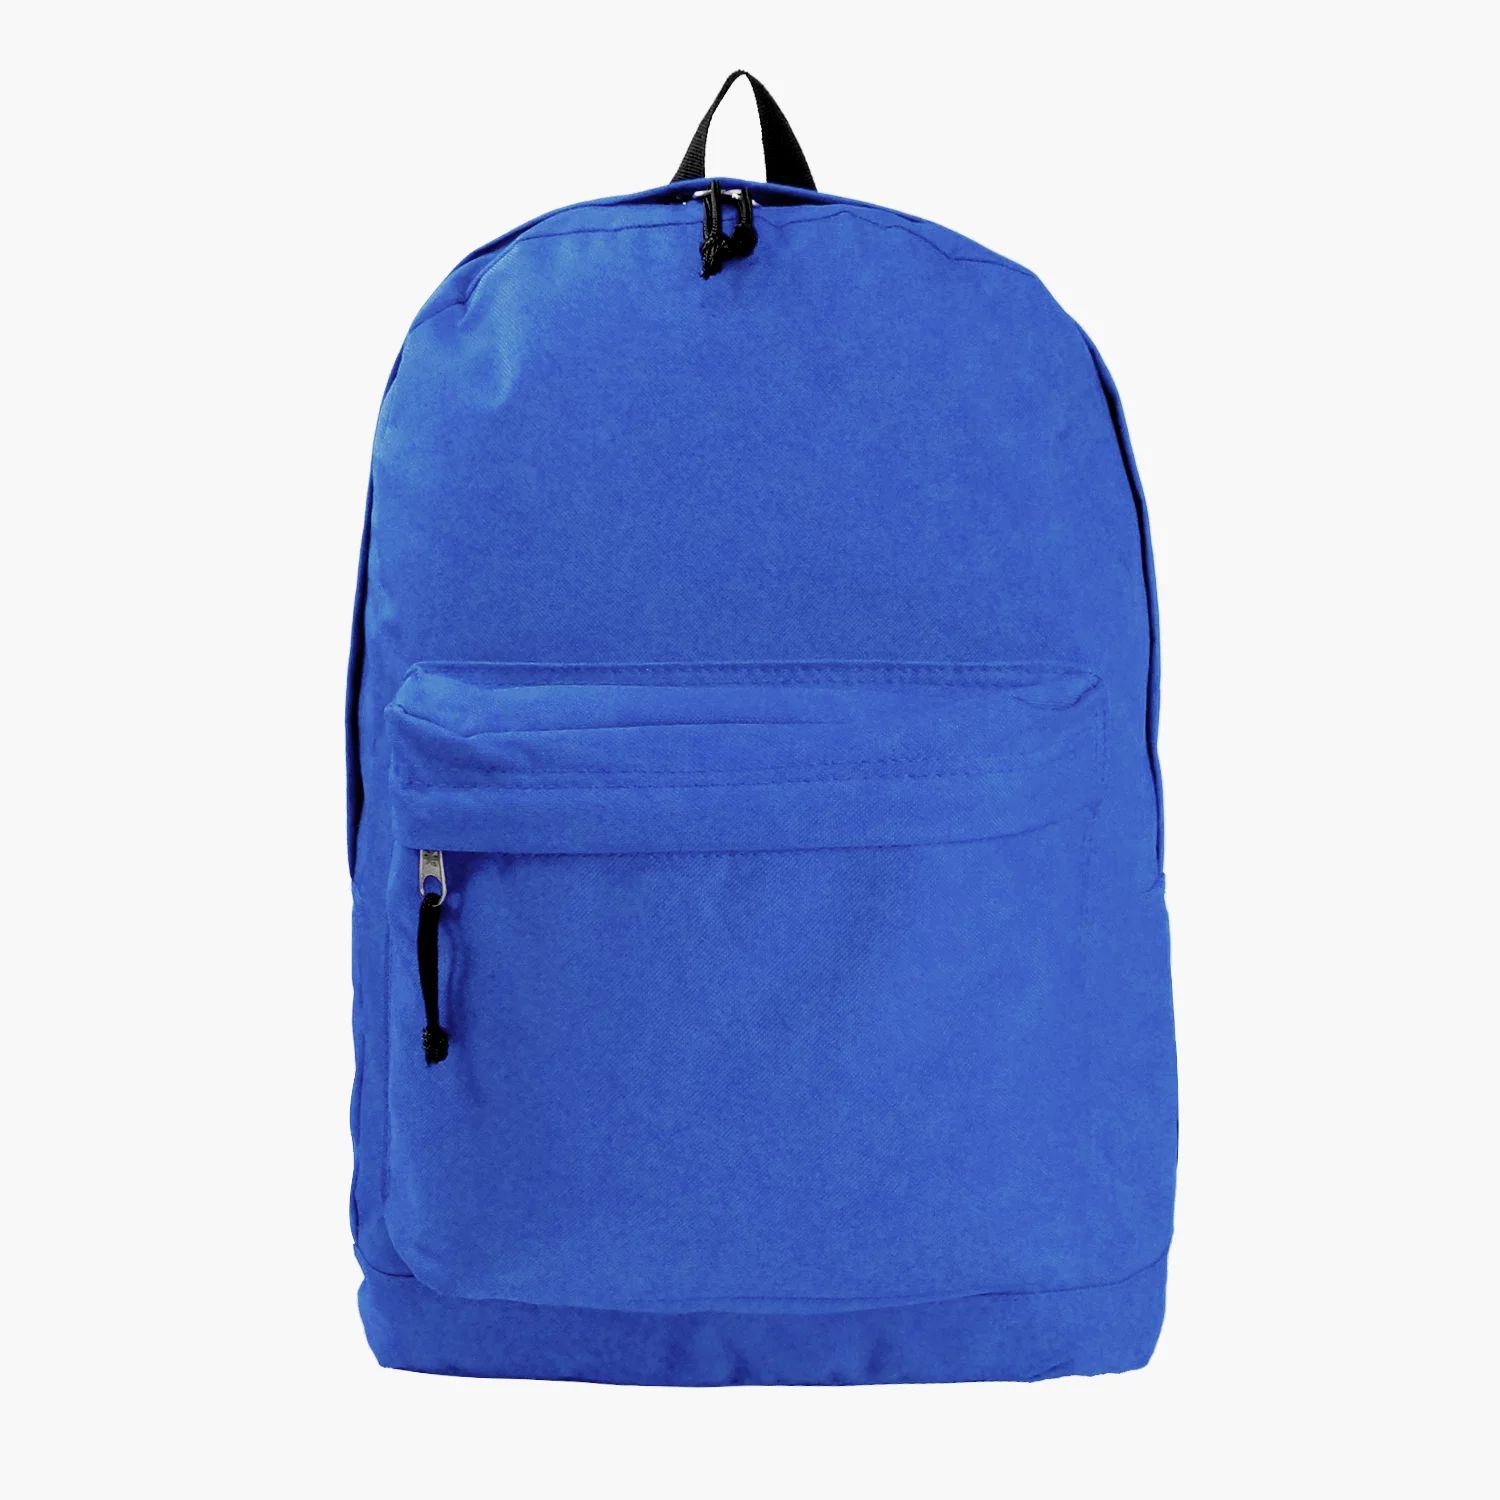 K-Cliffs Classic Backpack 18 inch with Curved Shoulder Straps Royal Blue, Unisex Teen to Adults -... | Walmart (US)